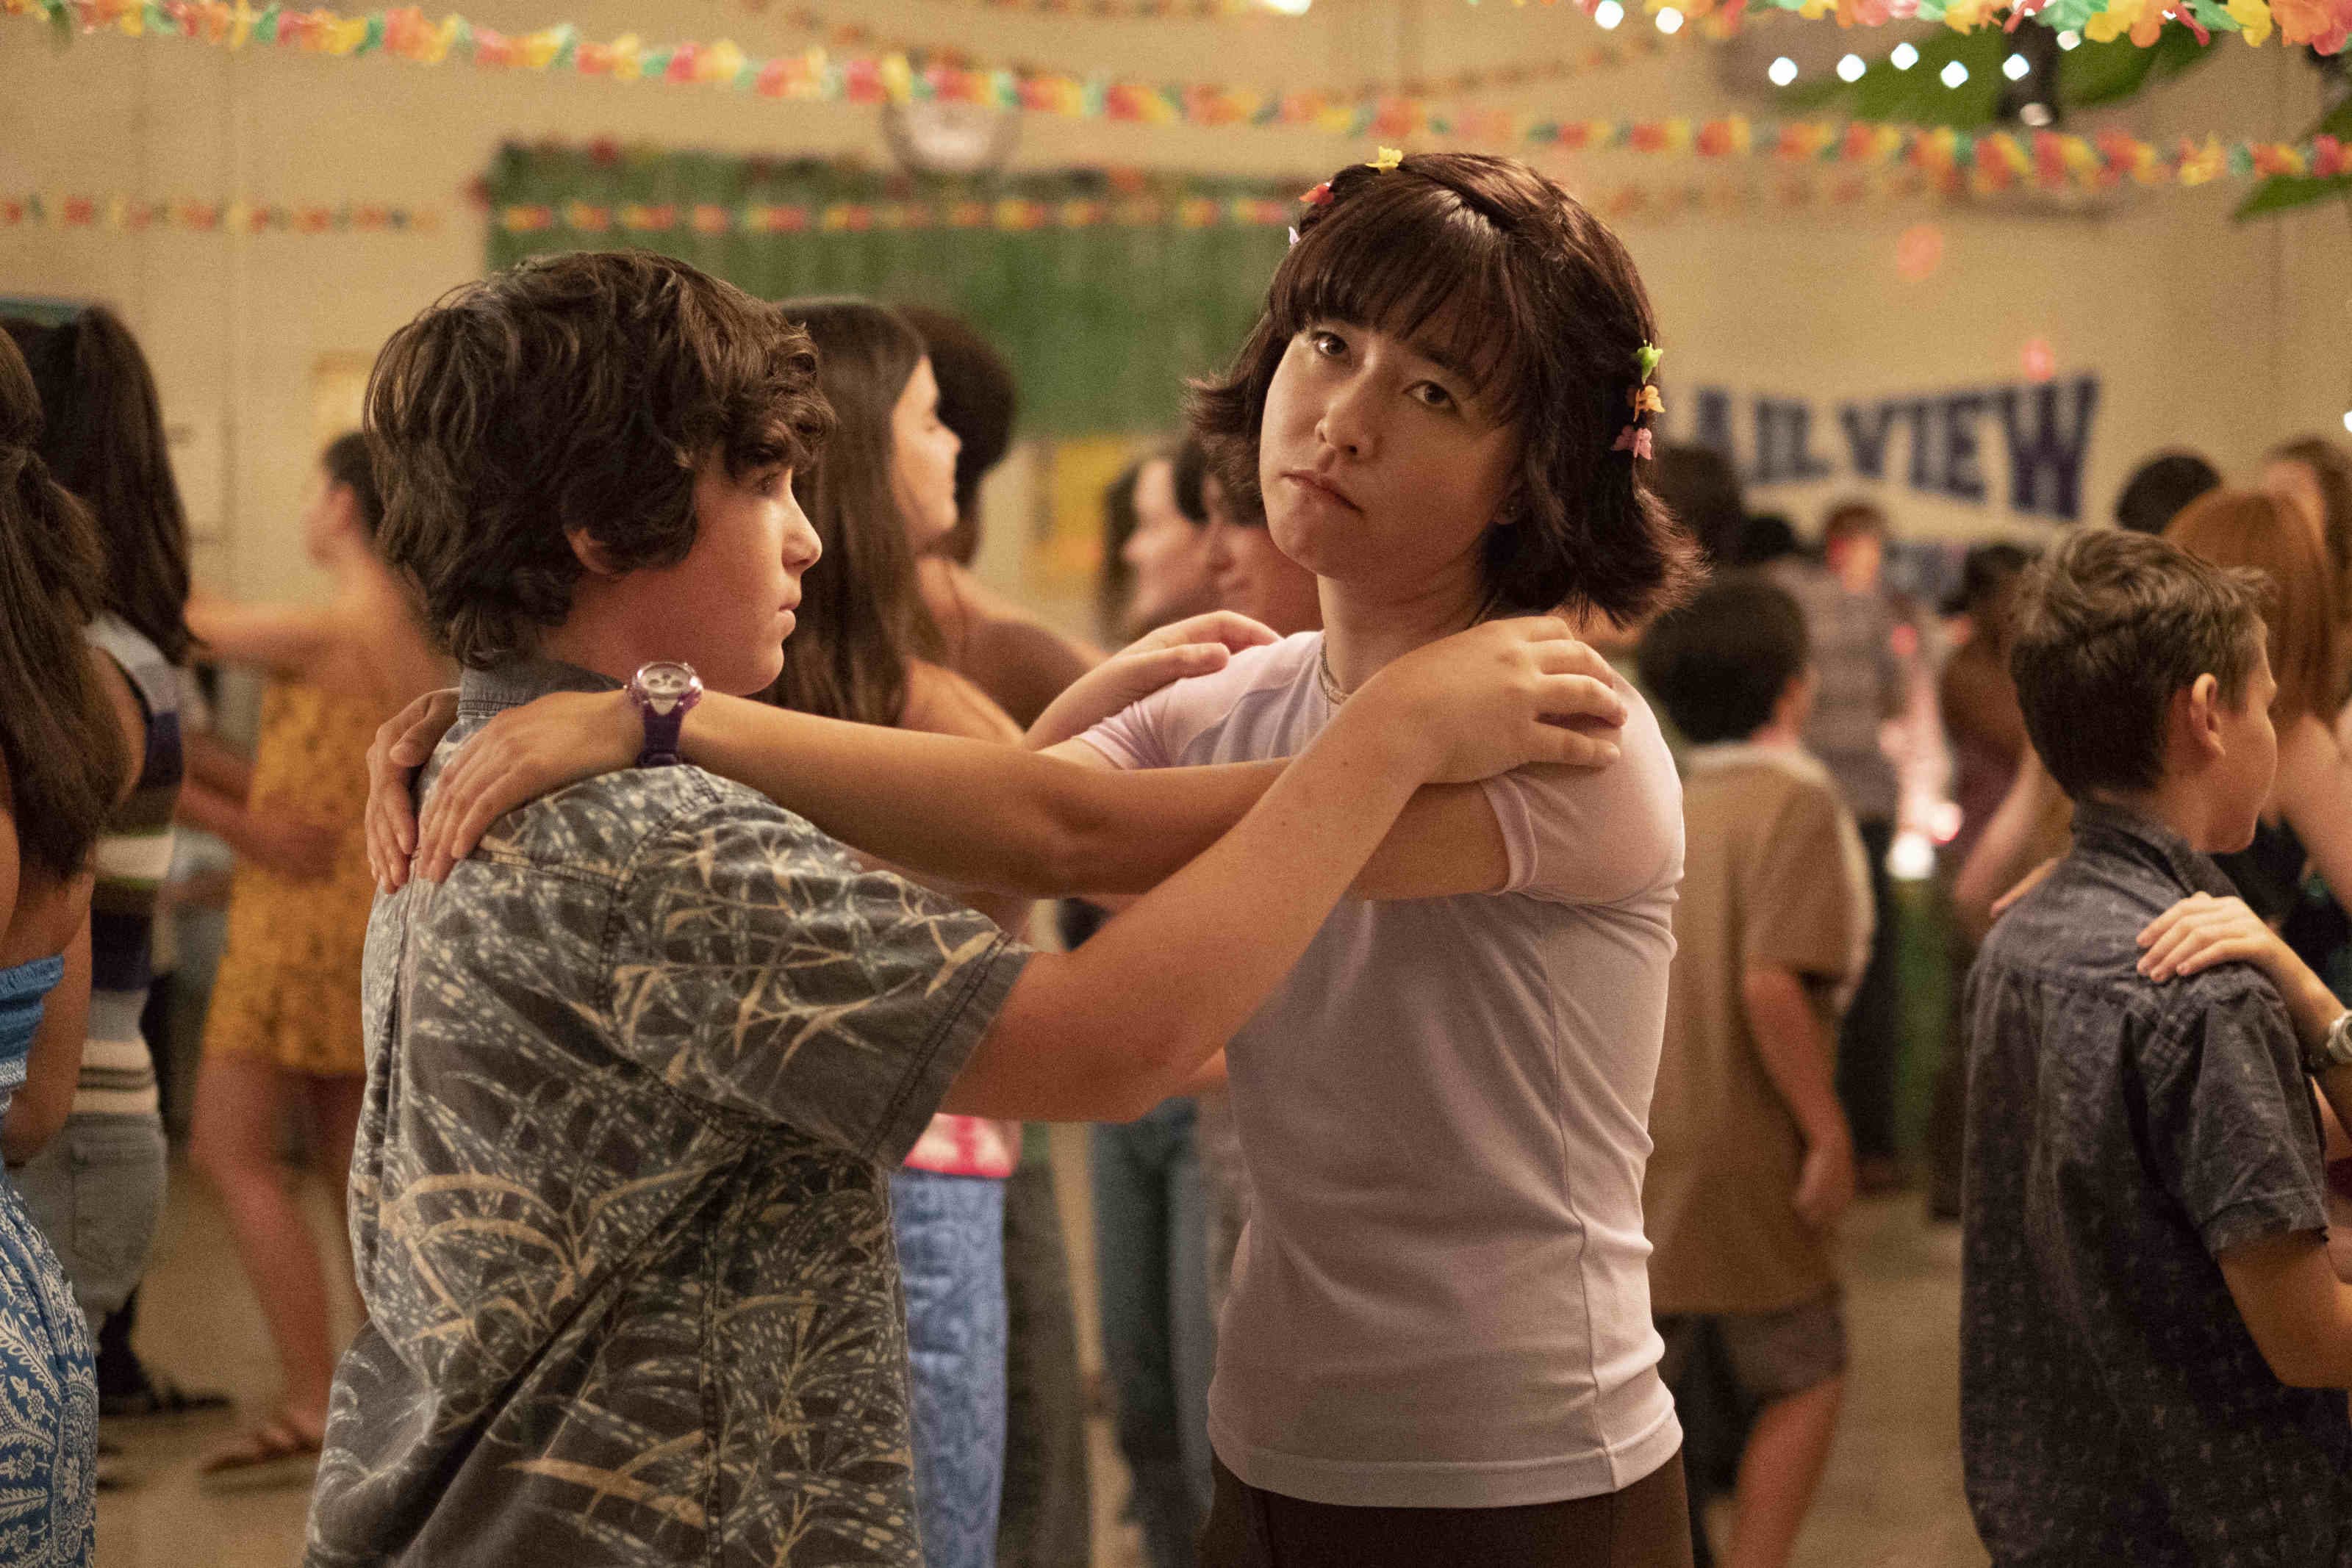 Stranger Things 2': Season 1 Recap and What You Need to Remember